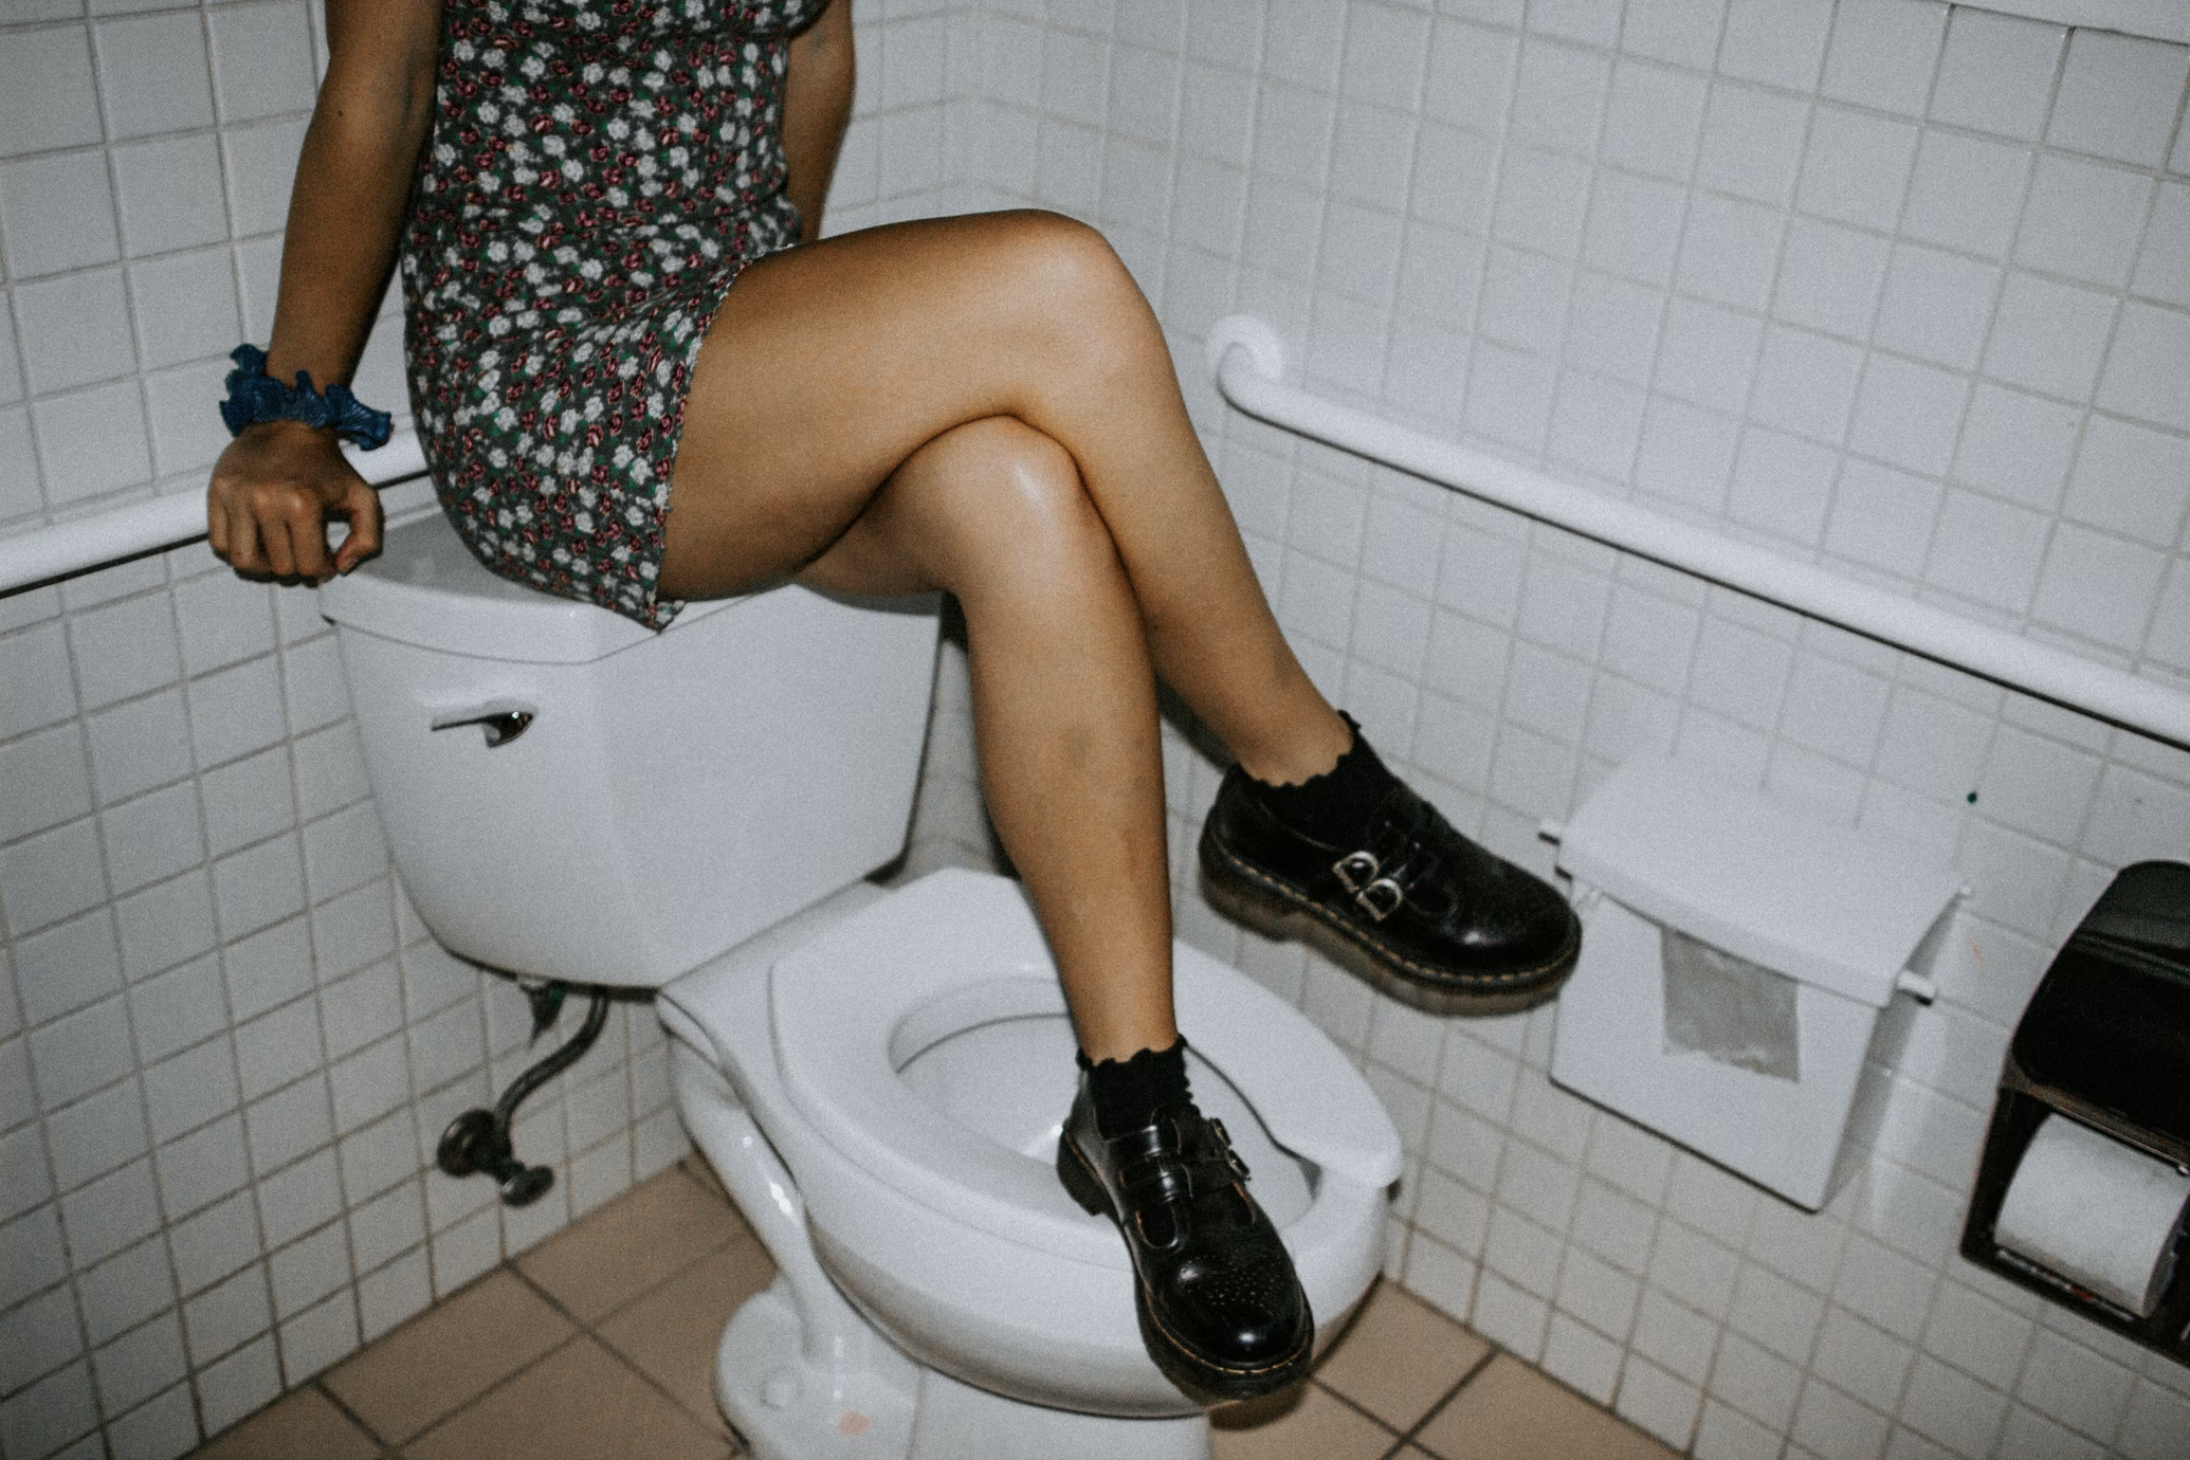 dale morley recommends Girl Pissing In Toilet